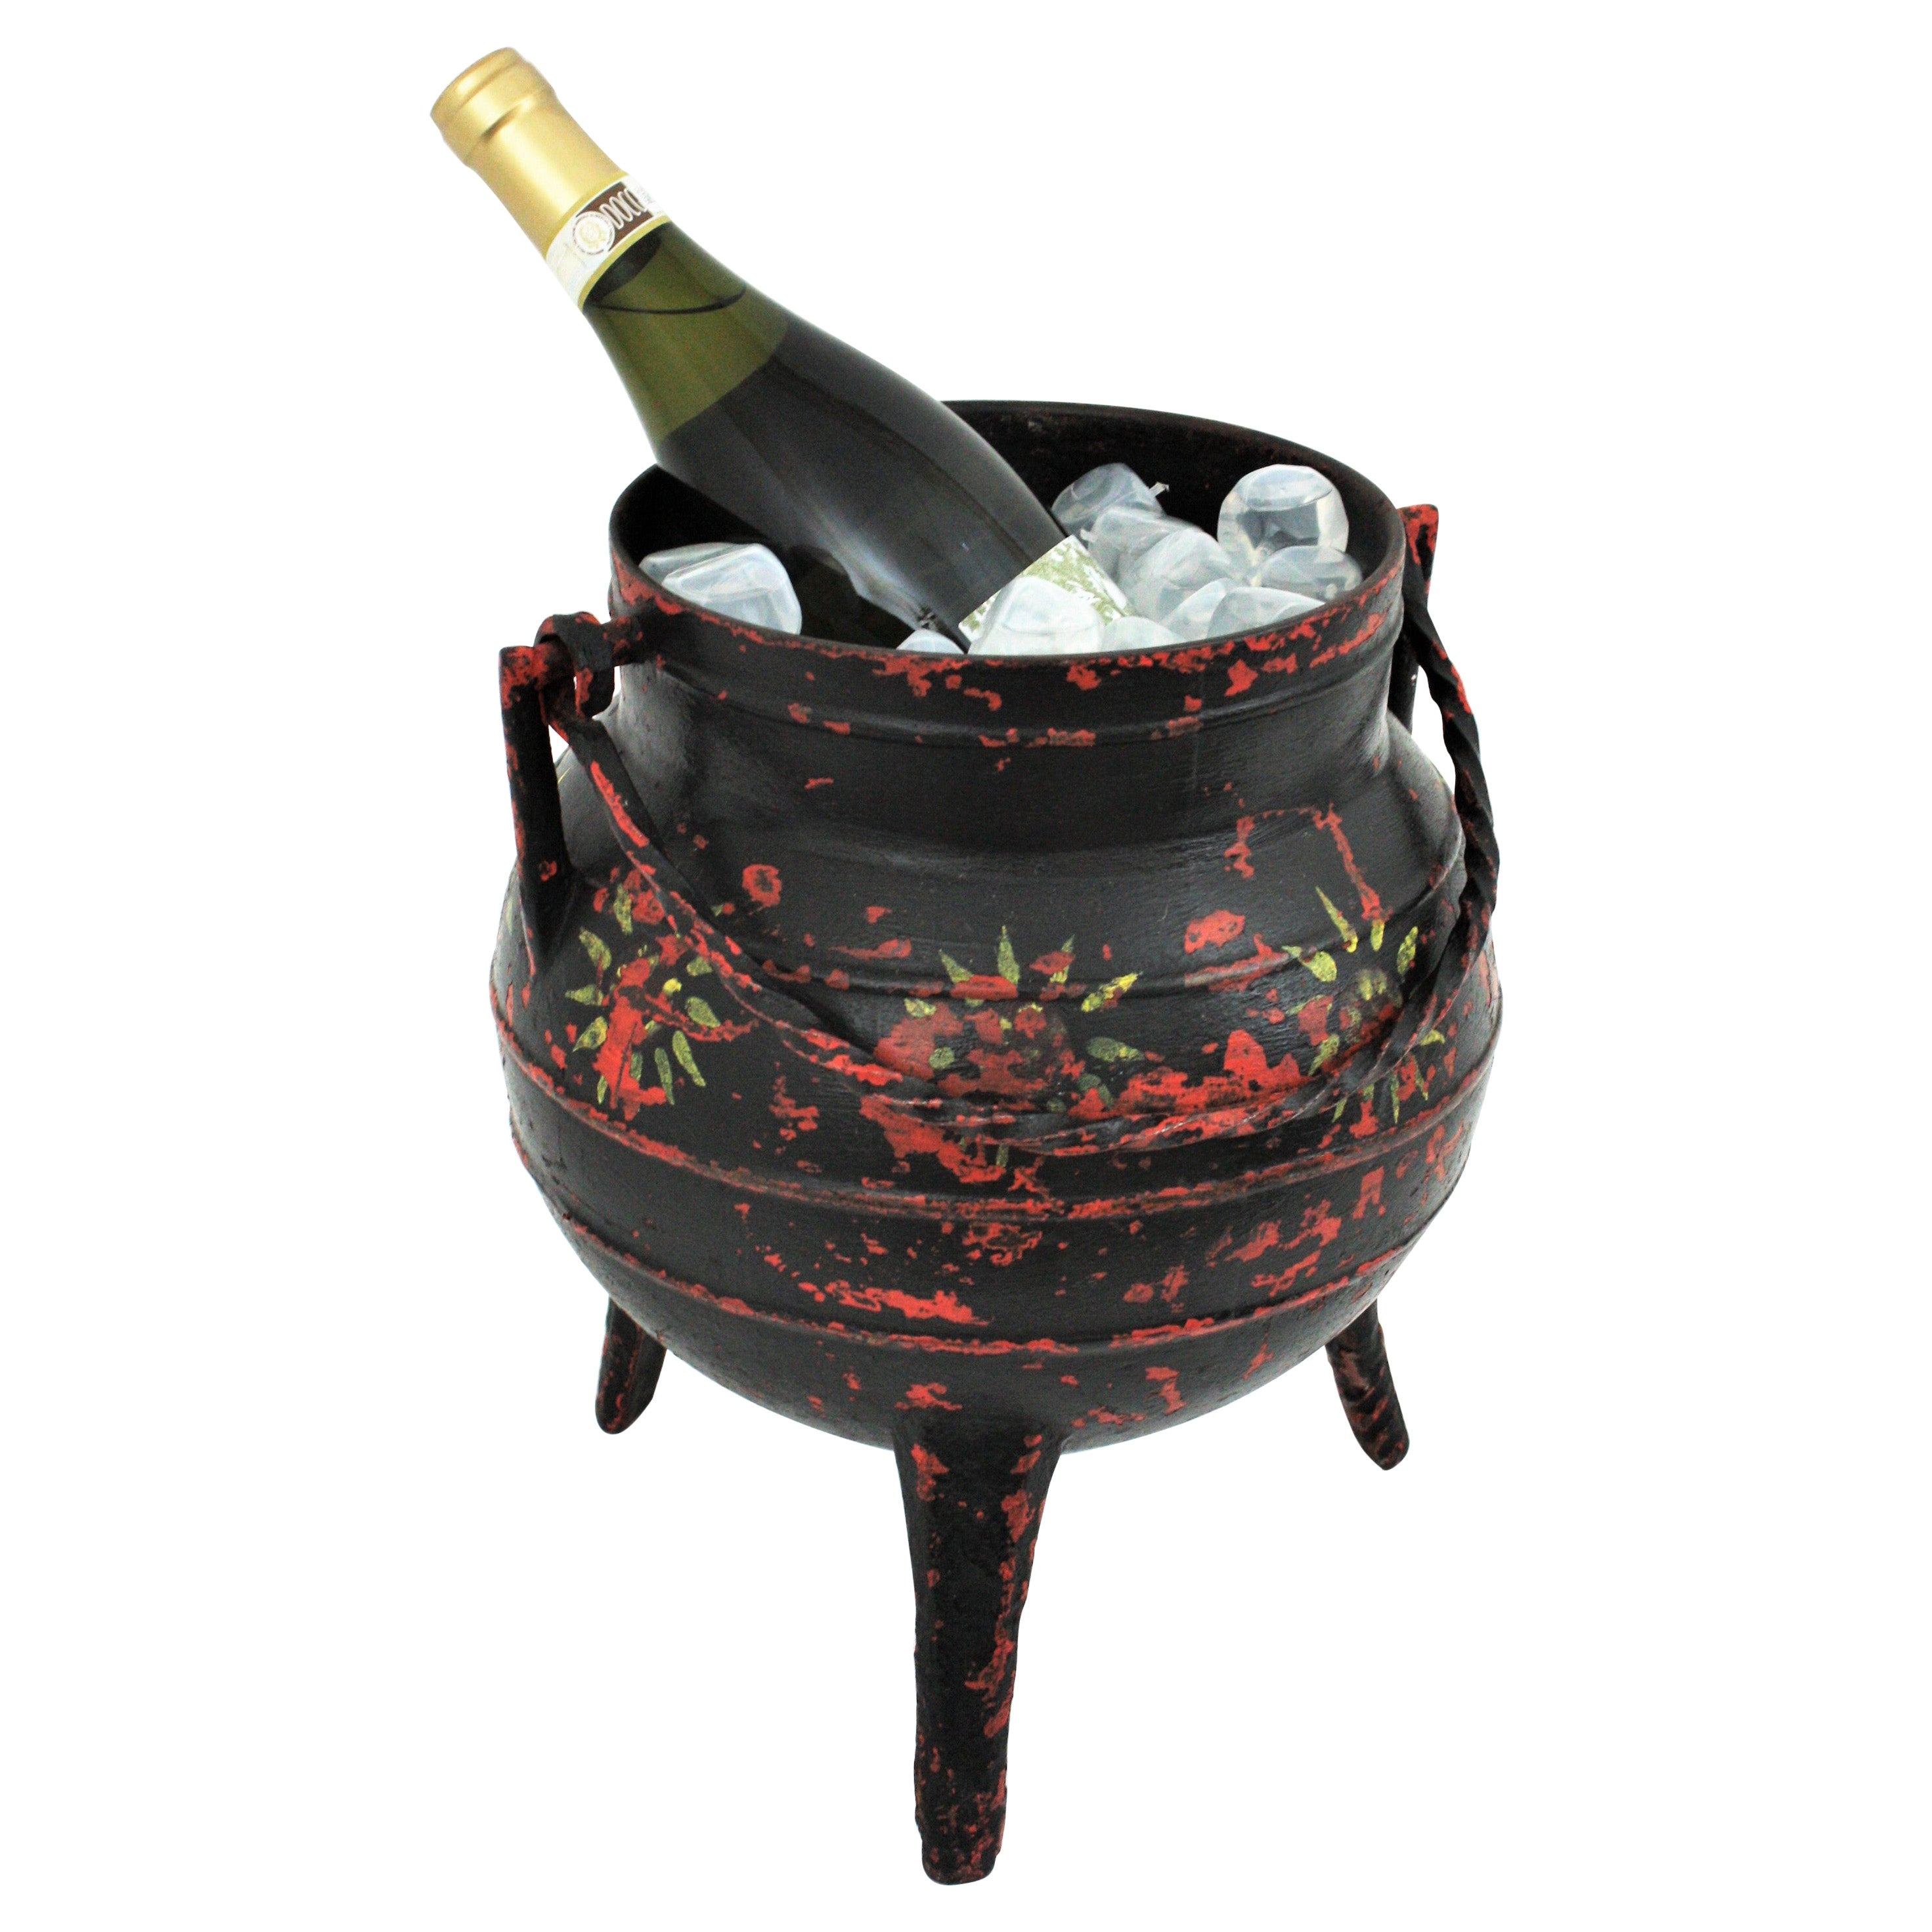 Spanish Folk Hand-Painted Ice Bucket or Wine Champagne Cooler